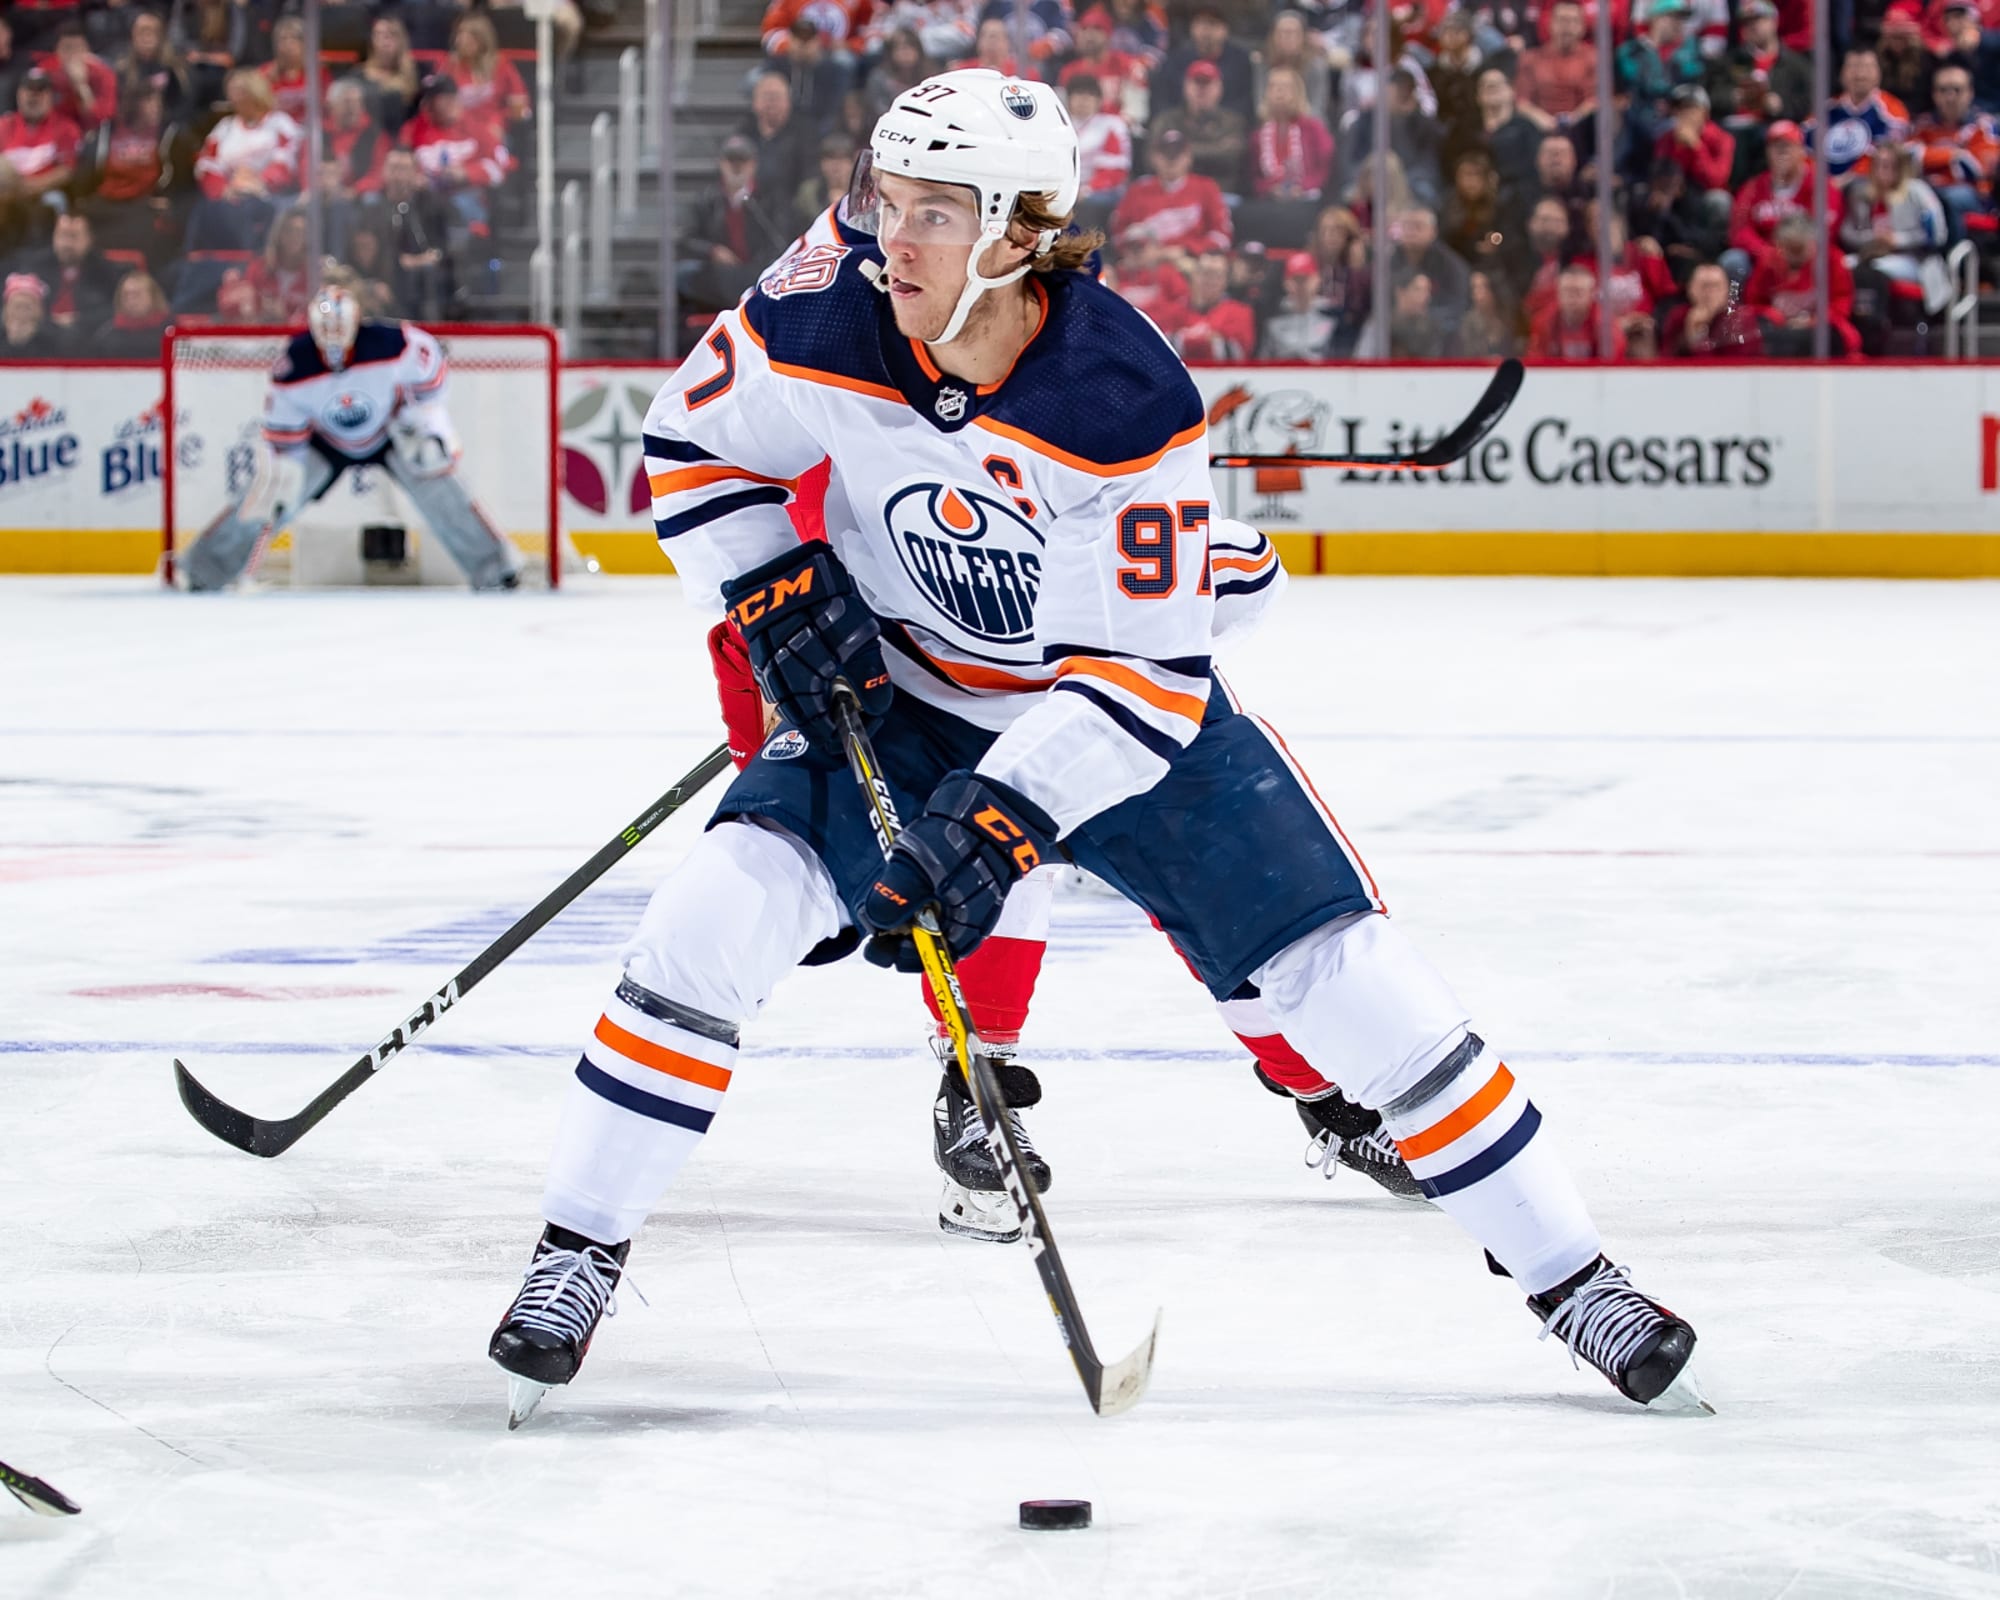 Edmonton Oilers: Three Games in Four Nights Is A Major Test